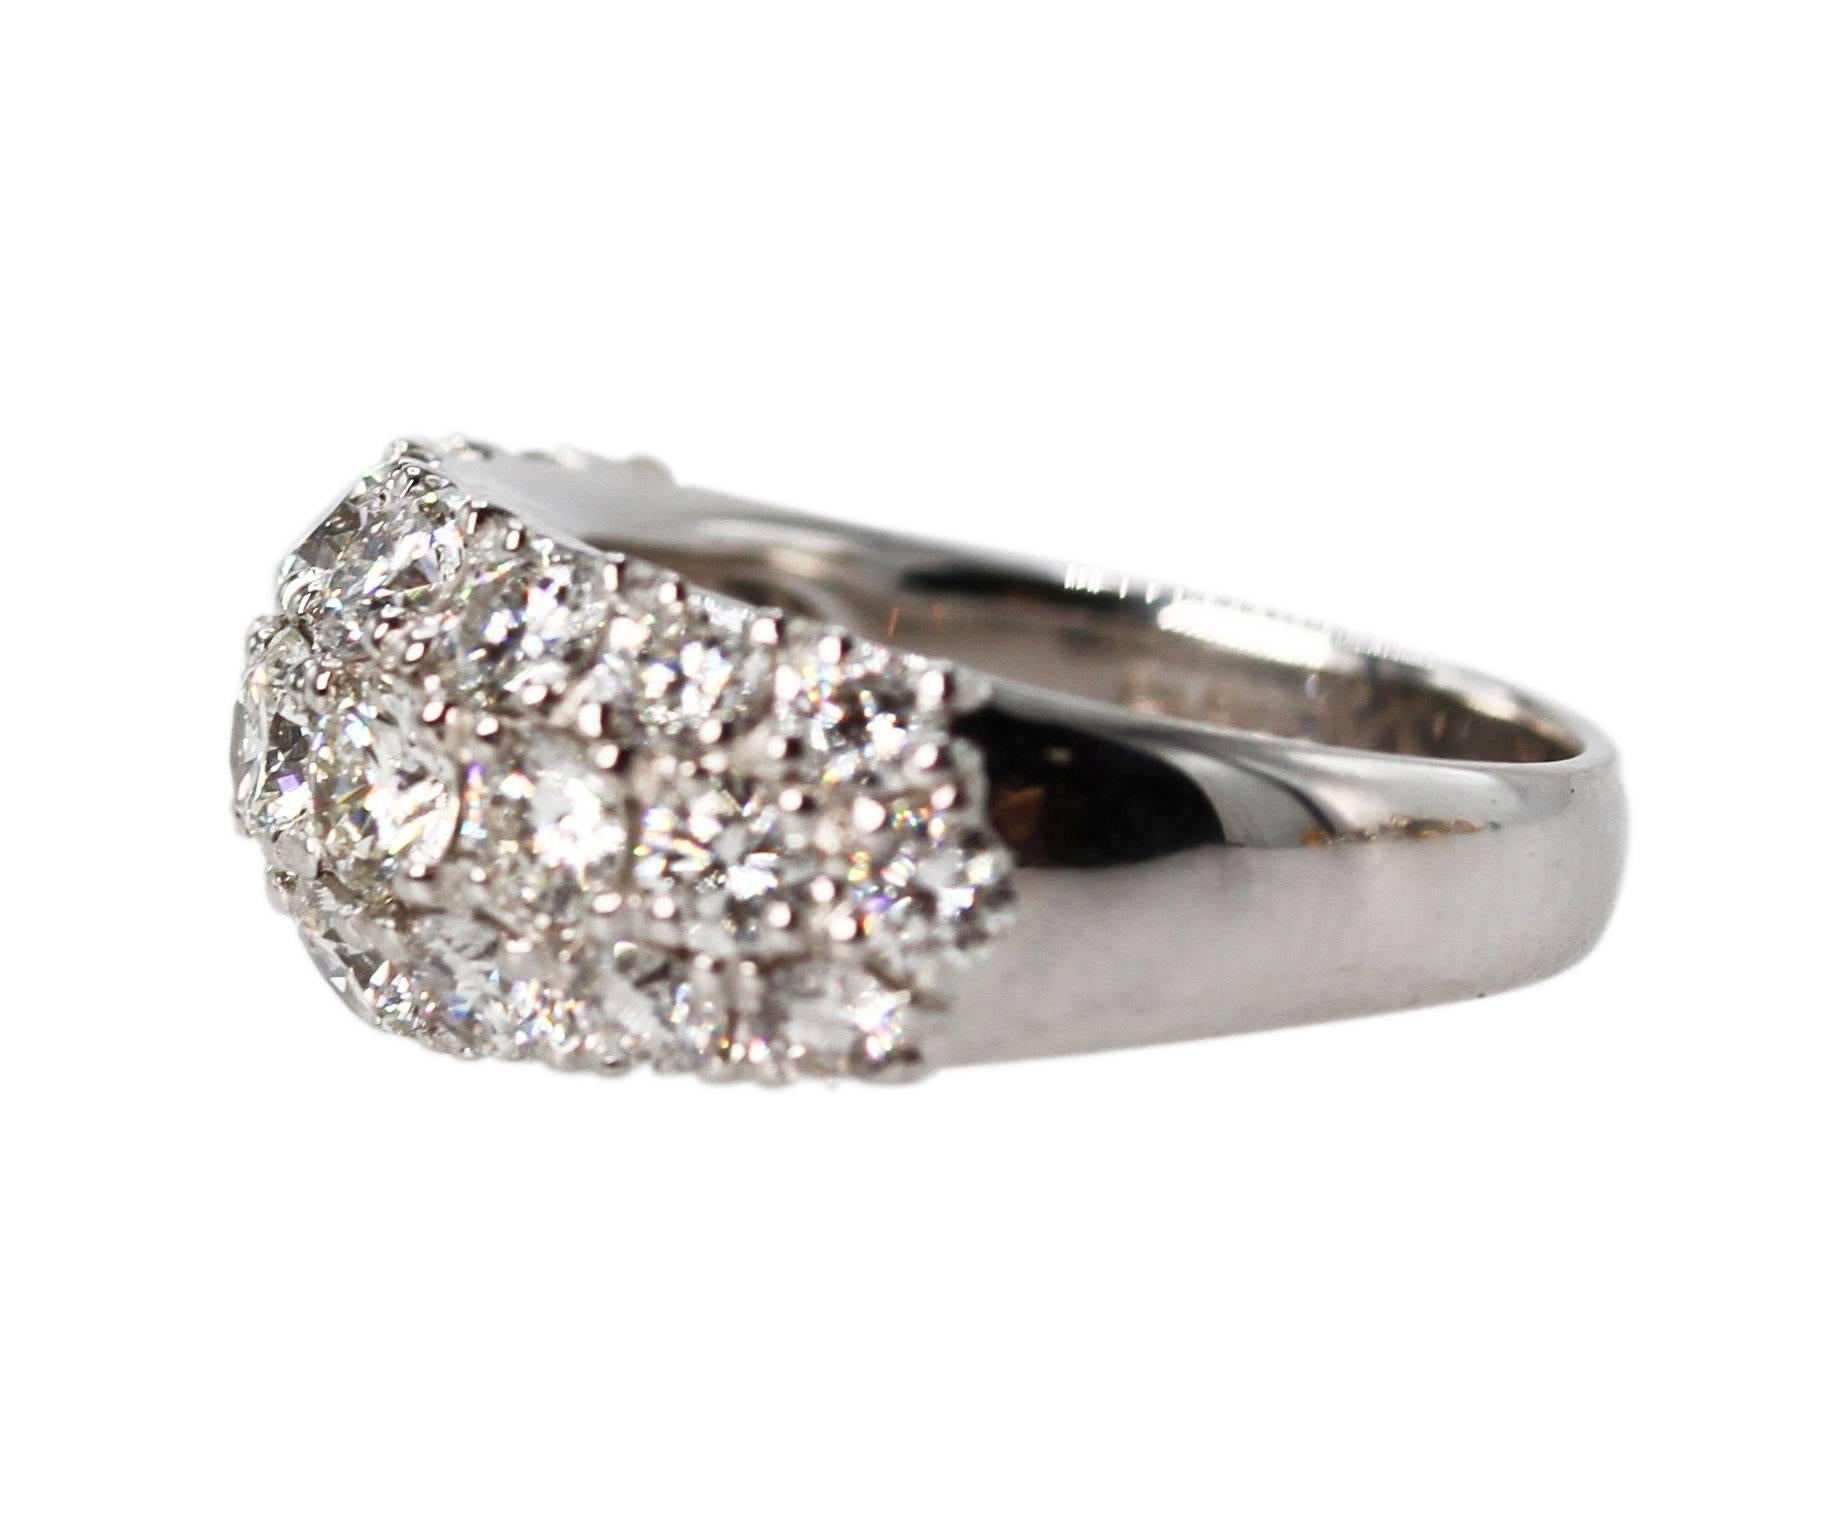 Platinum and Diamond Ring
• Stamped PT900 and D3.03
• 25 round diamonds weighing 3.03 carats
• Size 6.25, gross weight 10.9 grams